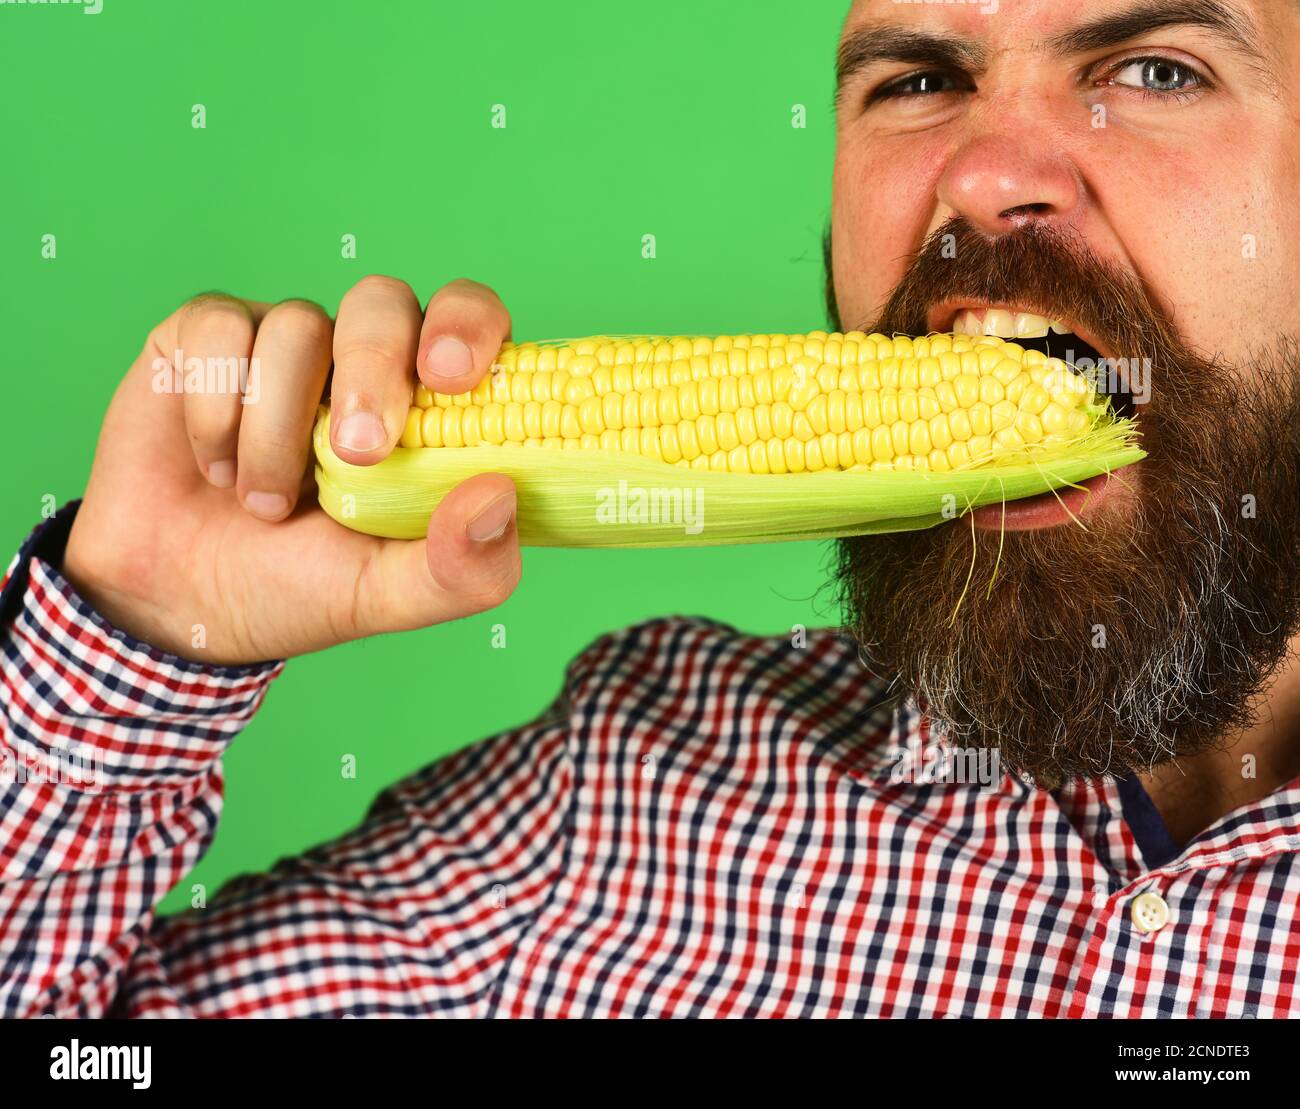 Agriculture and fall crops concept. Guy shows his harvest. Man with beard bites corn cob isolated on green background, close up. Farmer with hungry face holds yellow corn in mouth Stock Photo